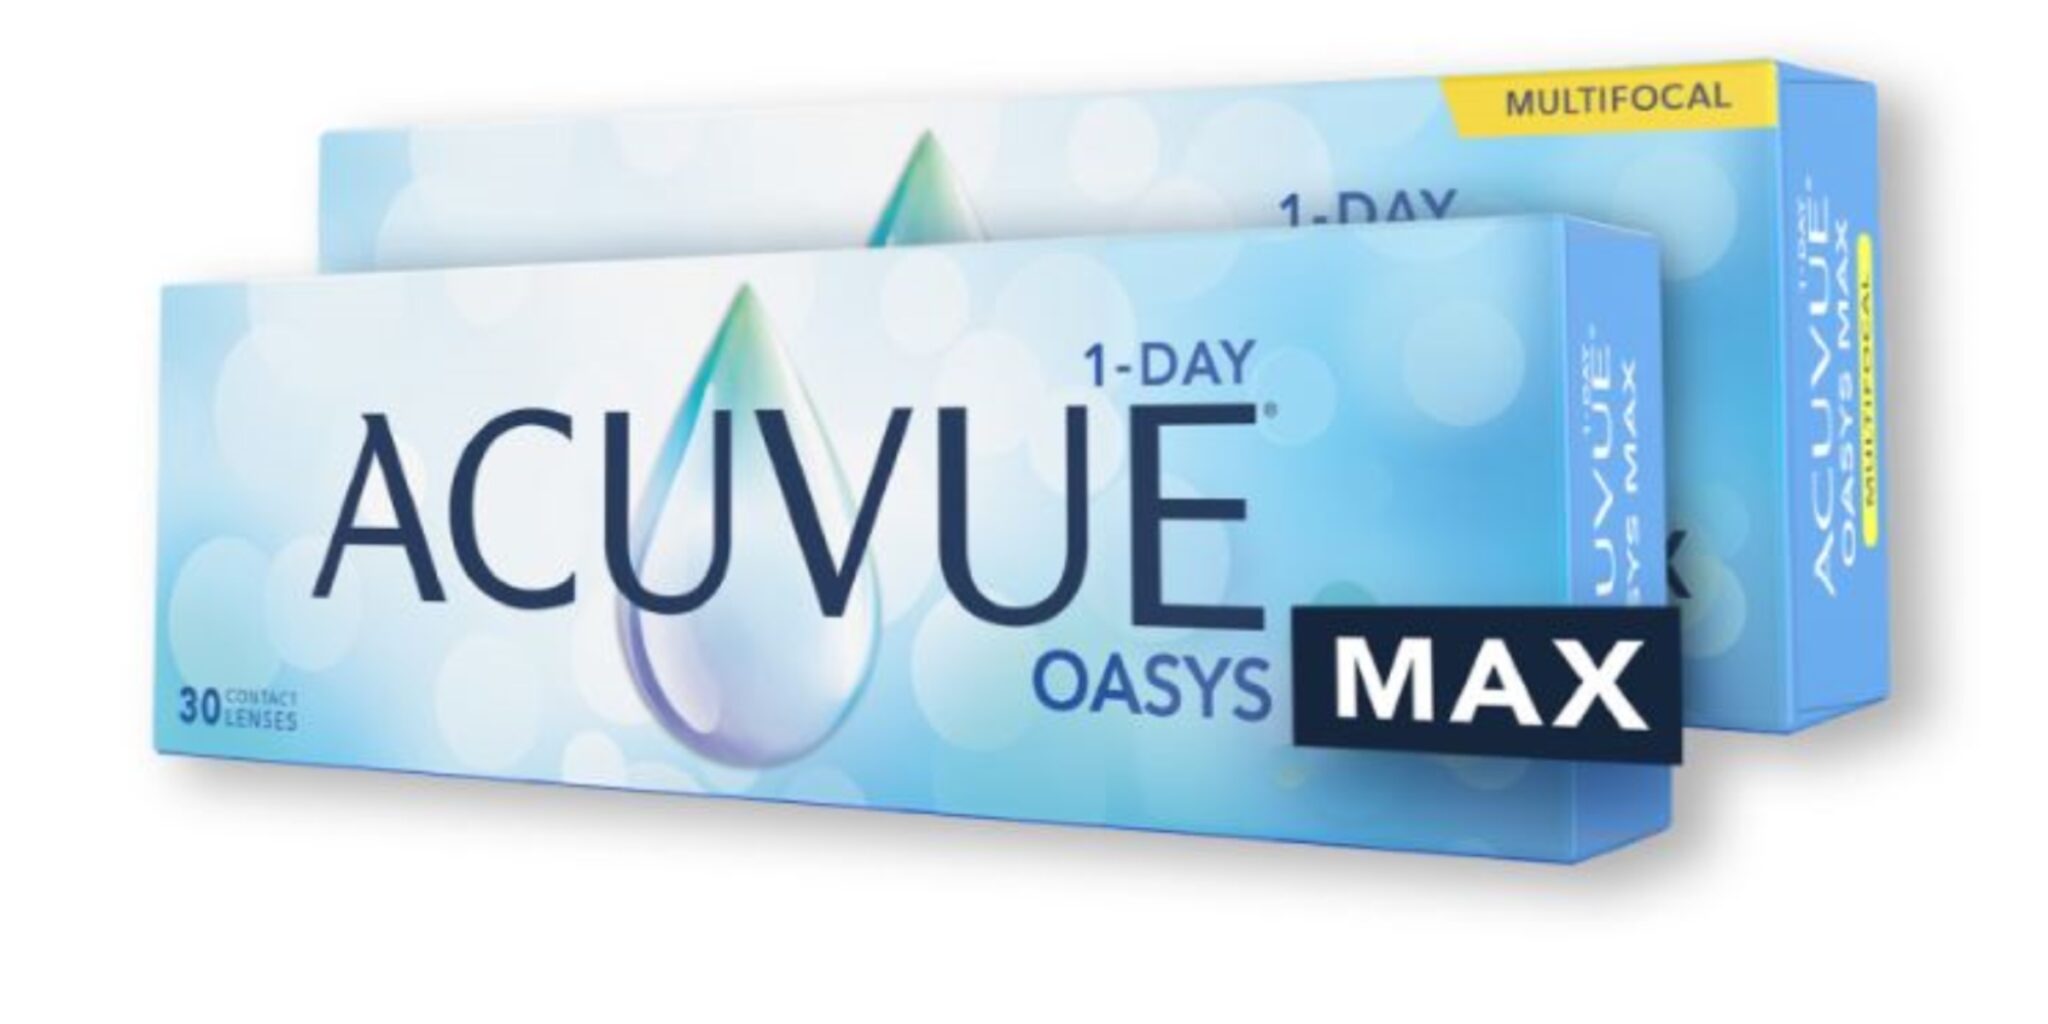 acuvue-oasys-max-1-day-30-pack-mylens-usa